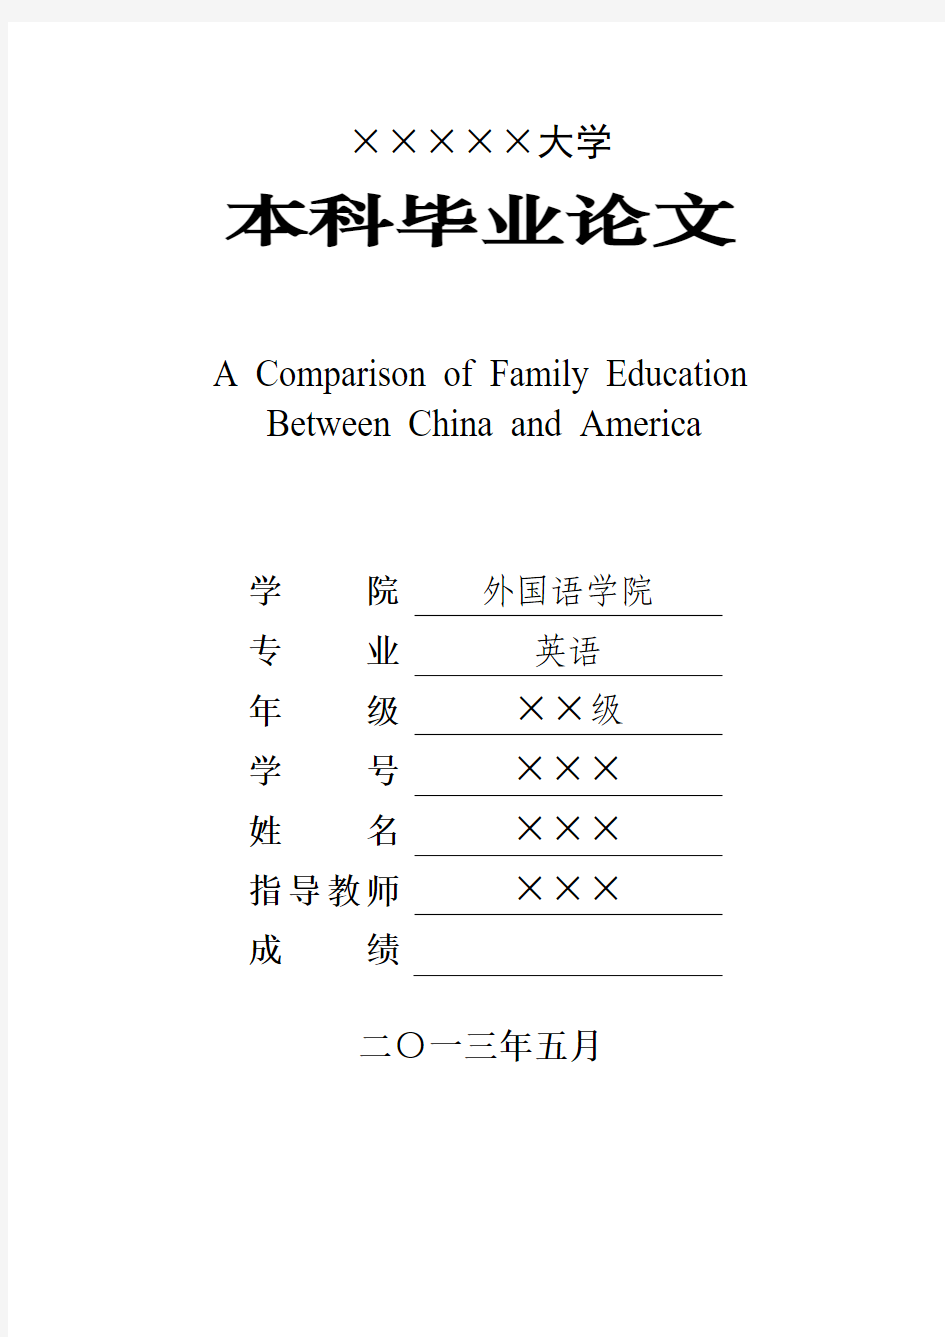 A Comparison of Family Education Between China and America